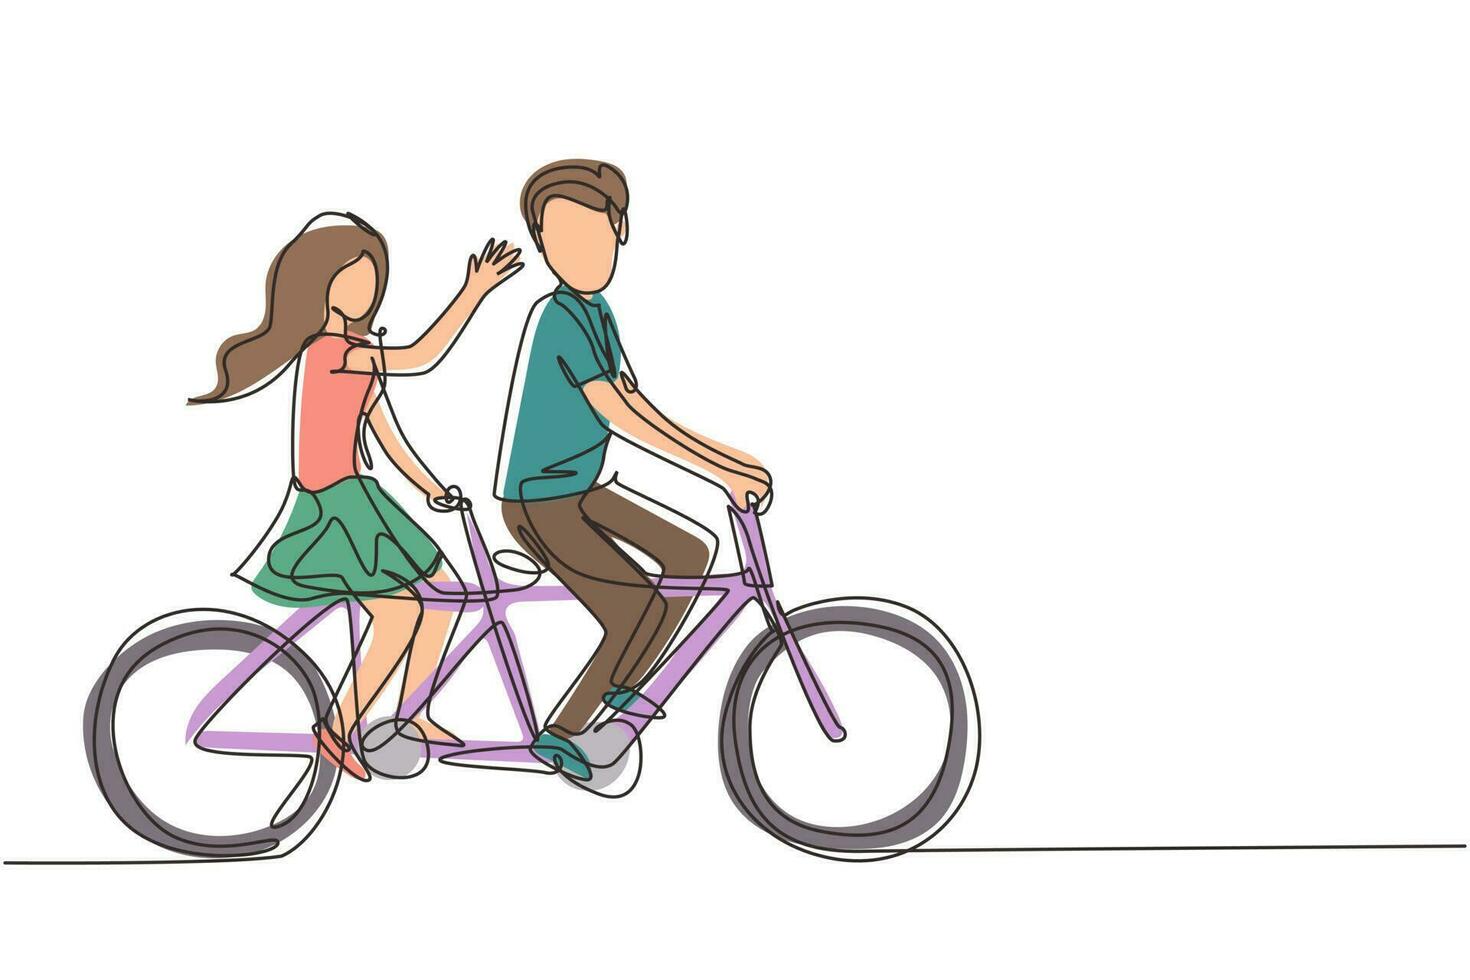 Continuous one line drawing romantic couple. Happy couple is riding tandem bicycle together. Happy family. Intimacy celebrates wedding anniversary. Single line draw design vector graphic illustration